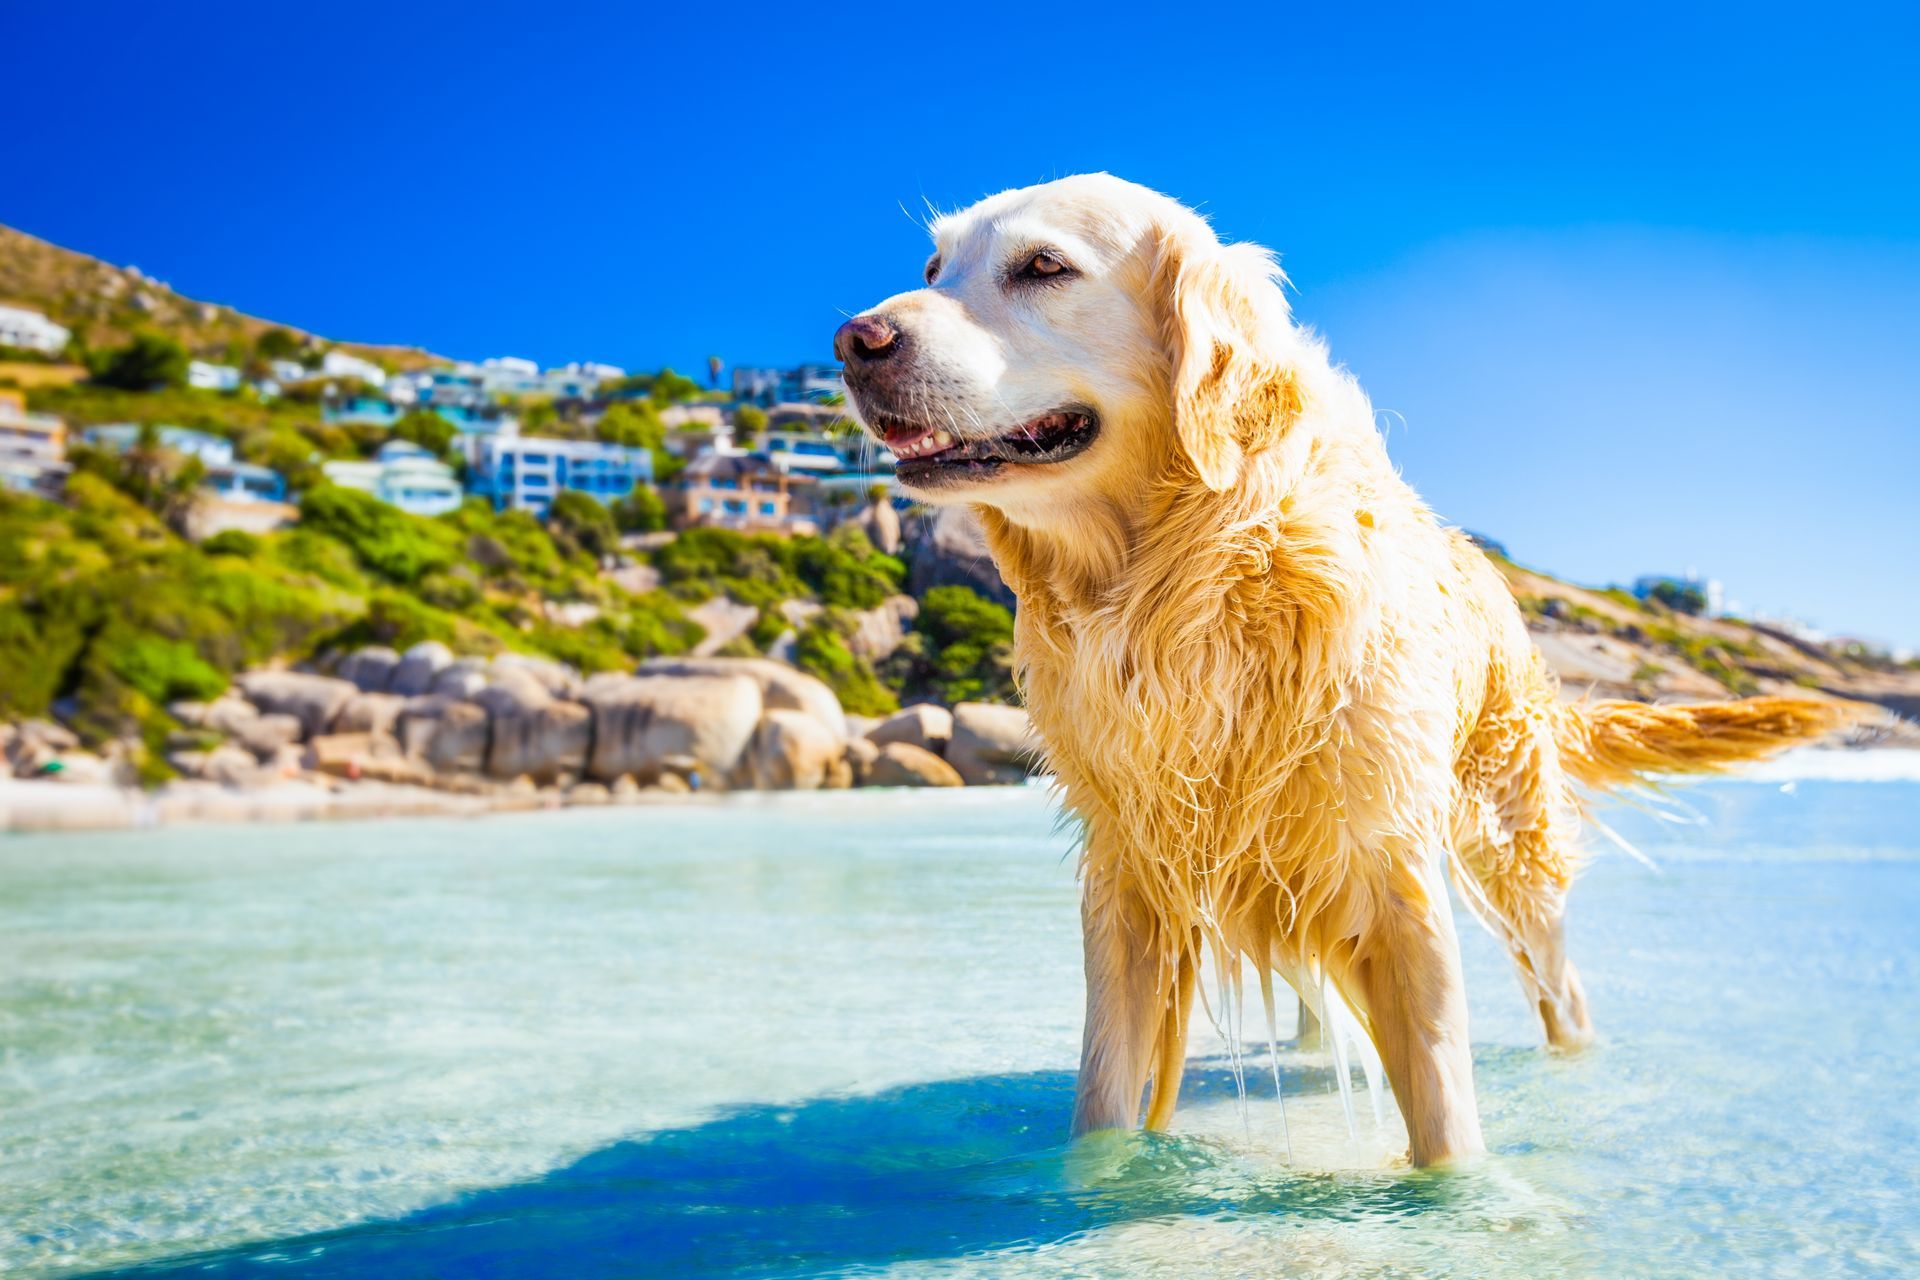 A dog is standing in the water on a beach.